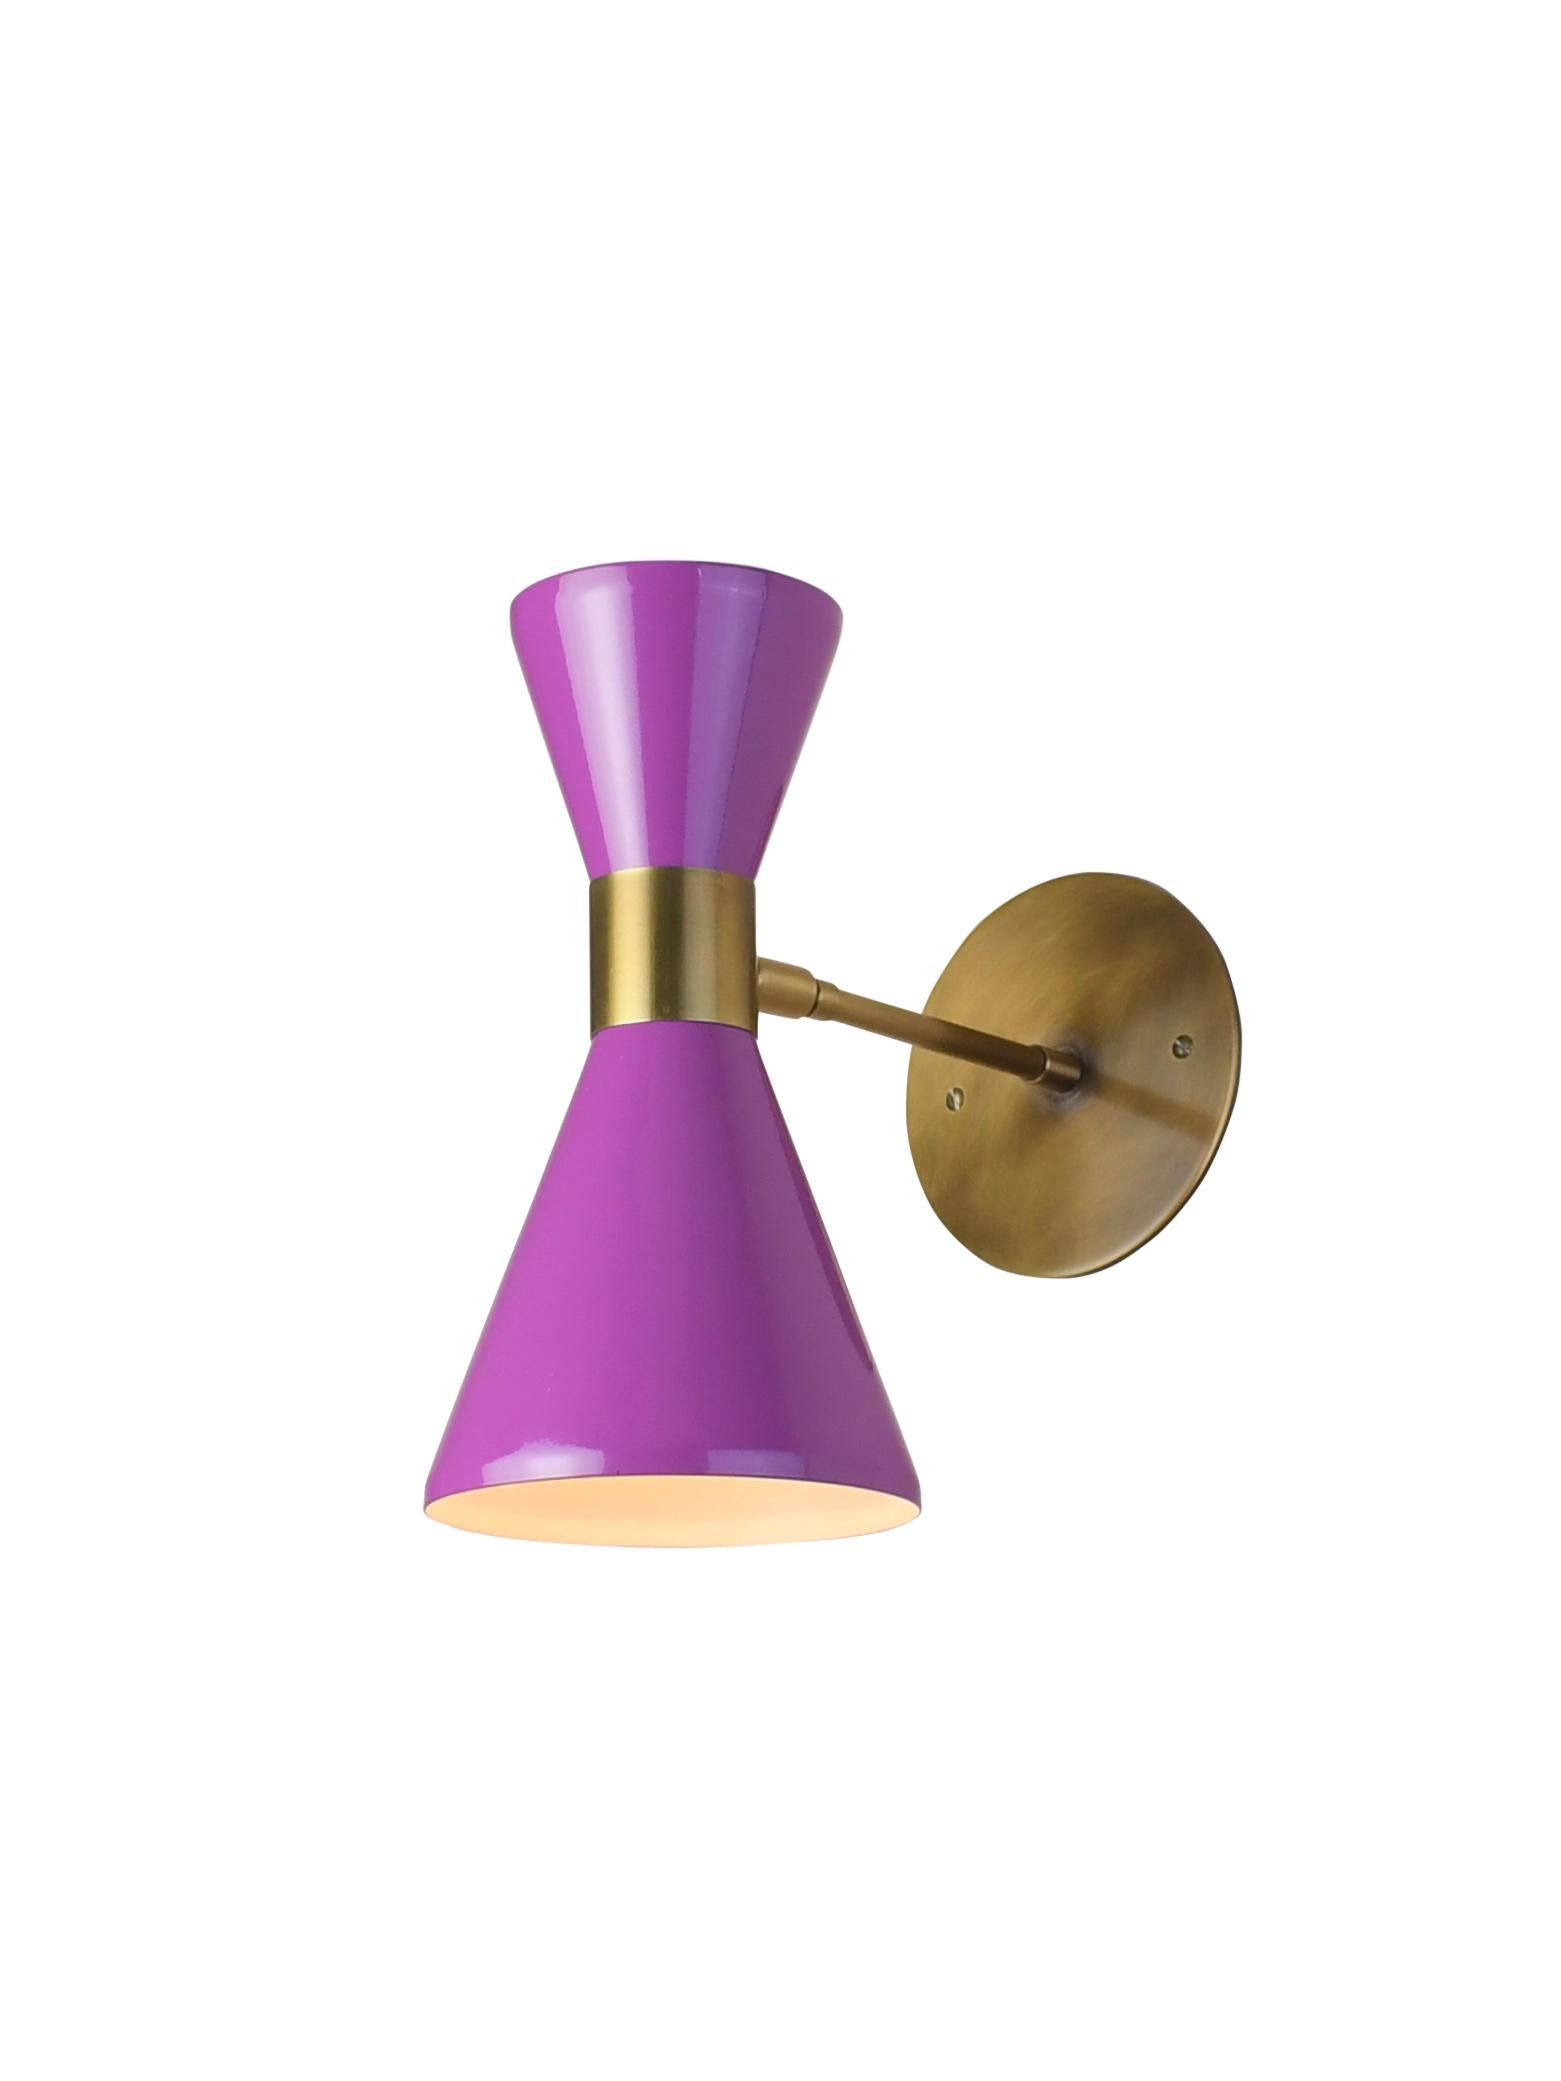 The Campana wall sconce or reading light shown in brushed brass and violet enamel by Blueprint Lighting, 2018. The wide band and distinctly bevelled edge makes the Campana a strong design statement. Swiveling head allows for cone adjustment. The